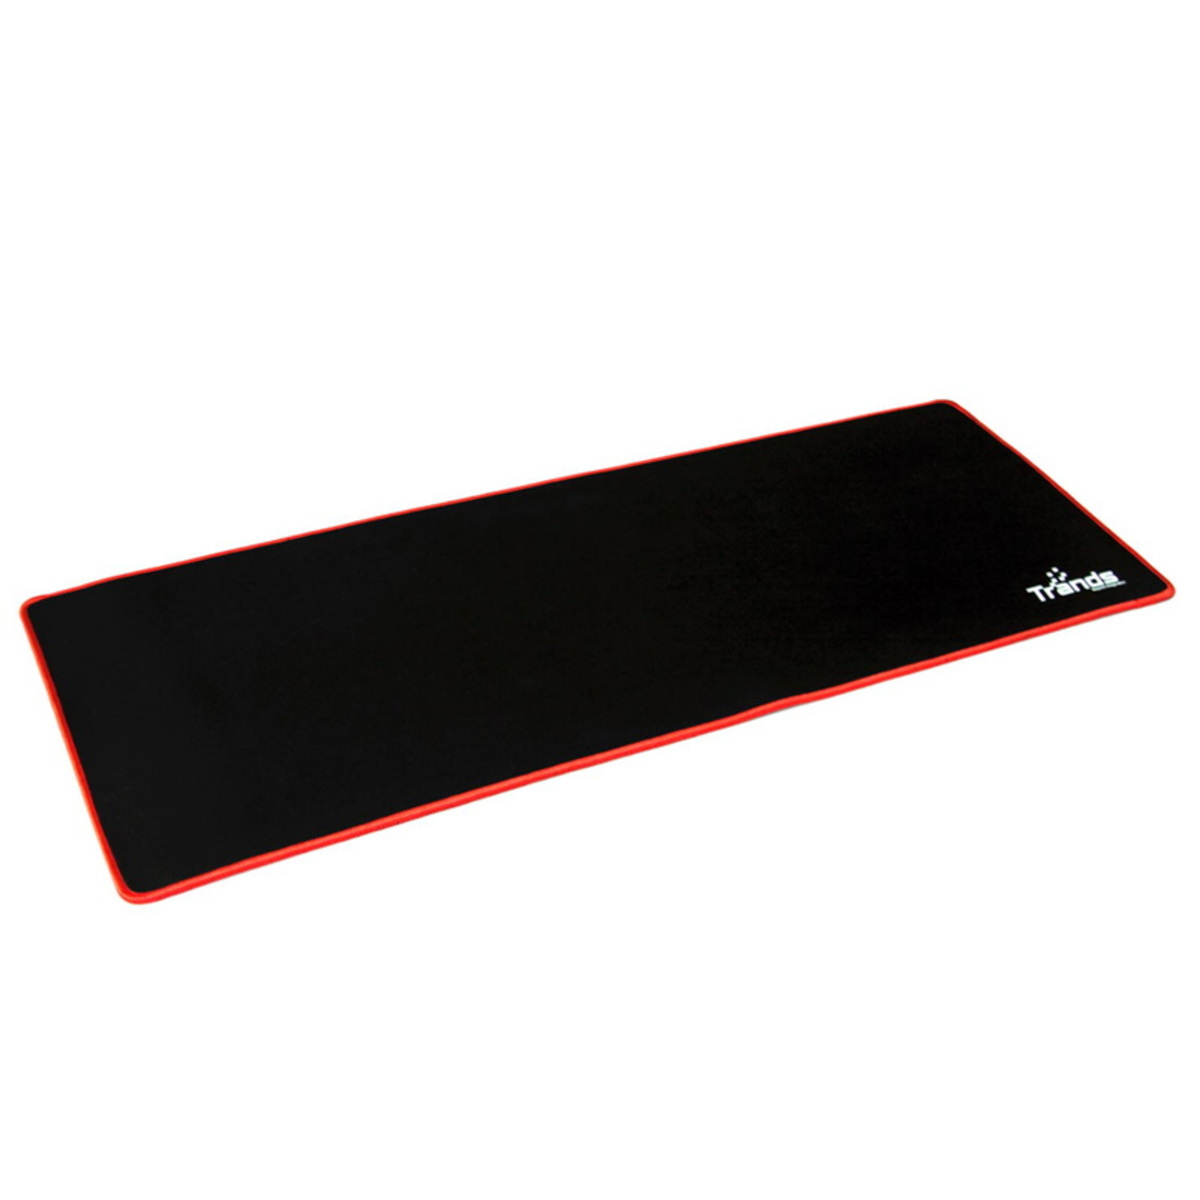 Trands Gaming Mouse Pad MP1561